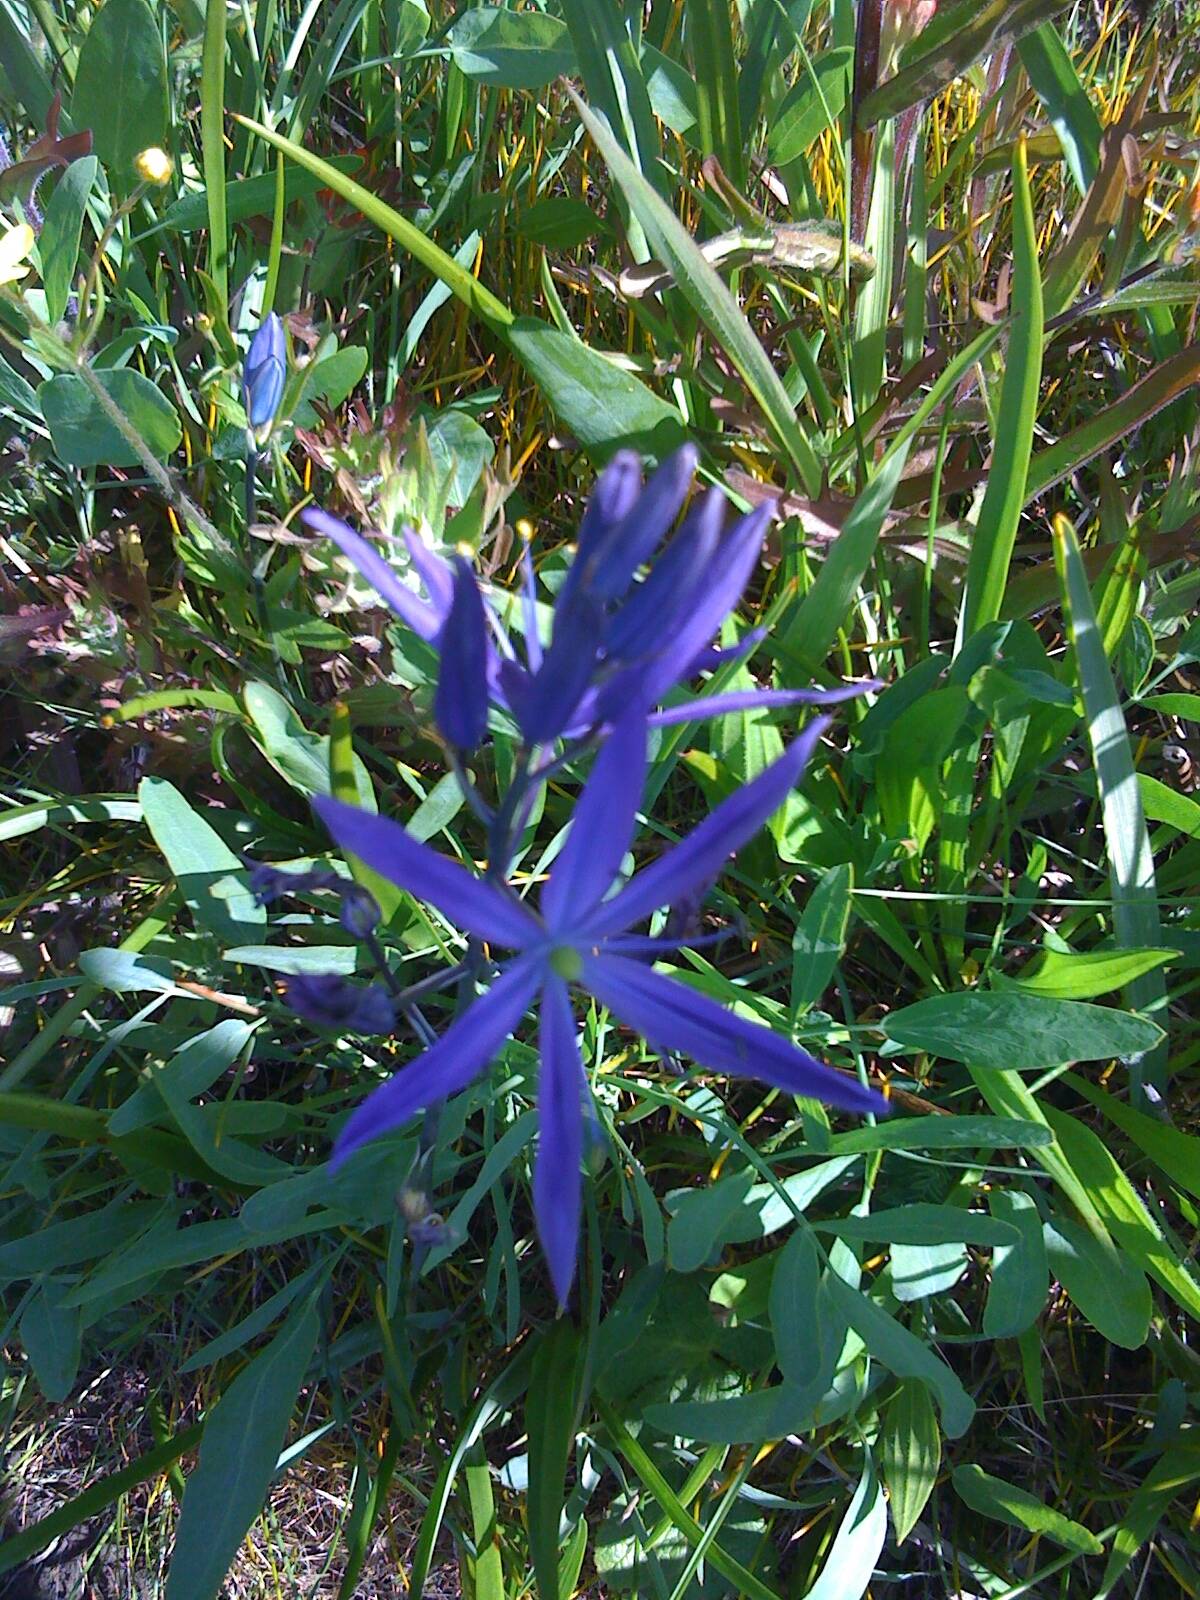 Contributed photo by the Master Gardeners of San Juan County
Common camas (Camassia quamash).